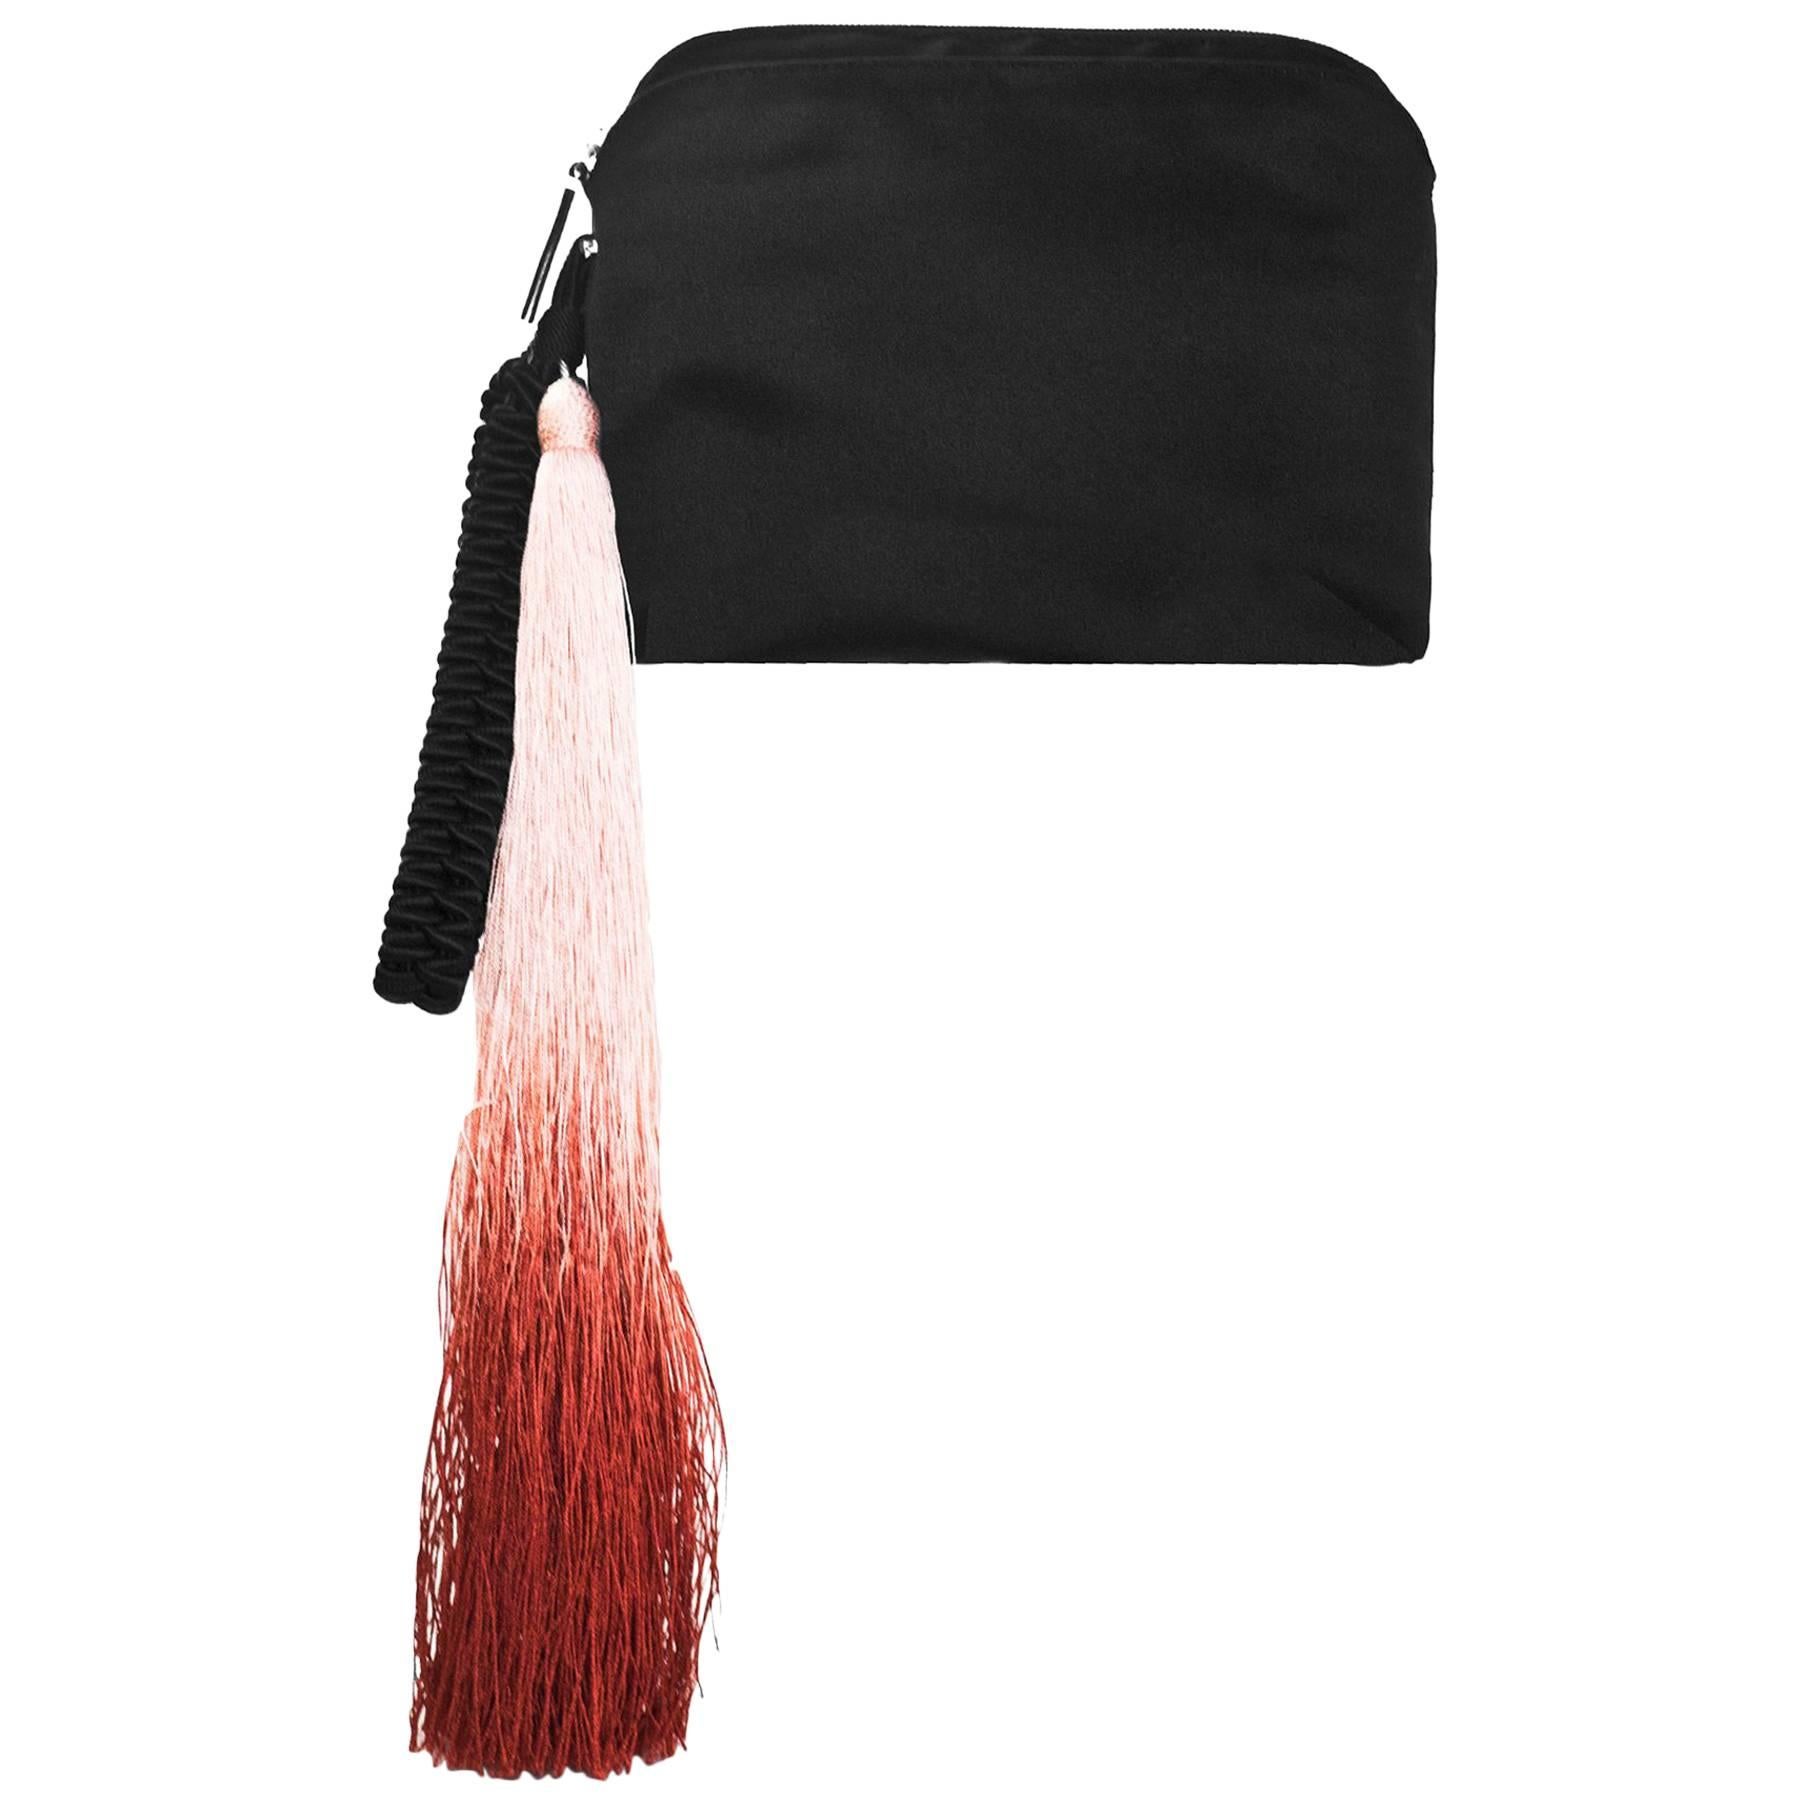 The Row Black Satin and Ombre Tassel Clutch Bag rt. $1, 850